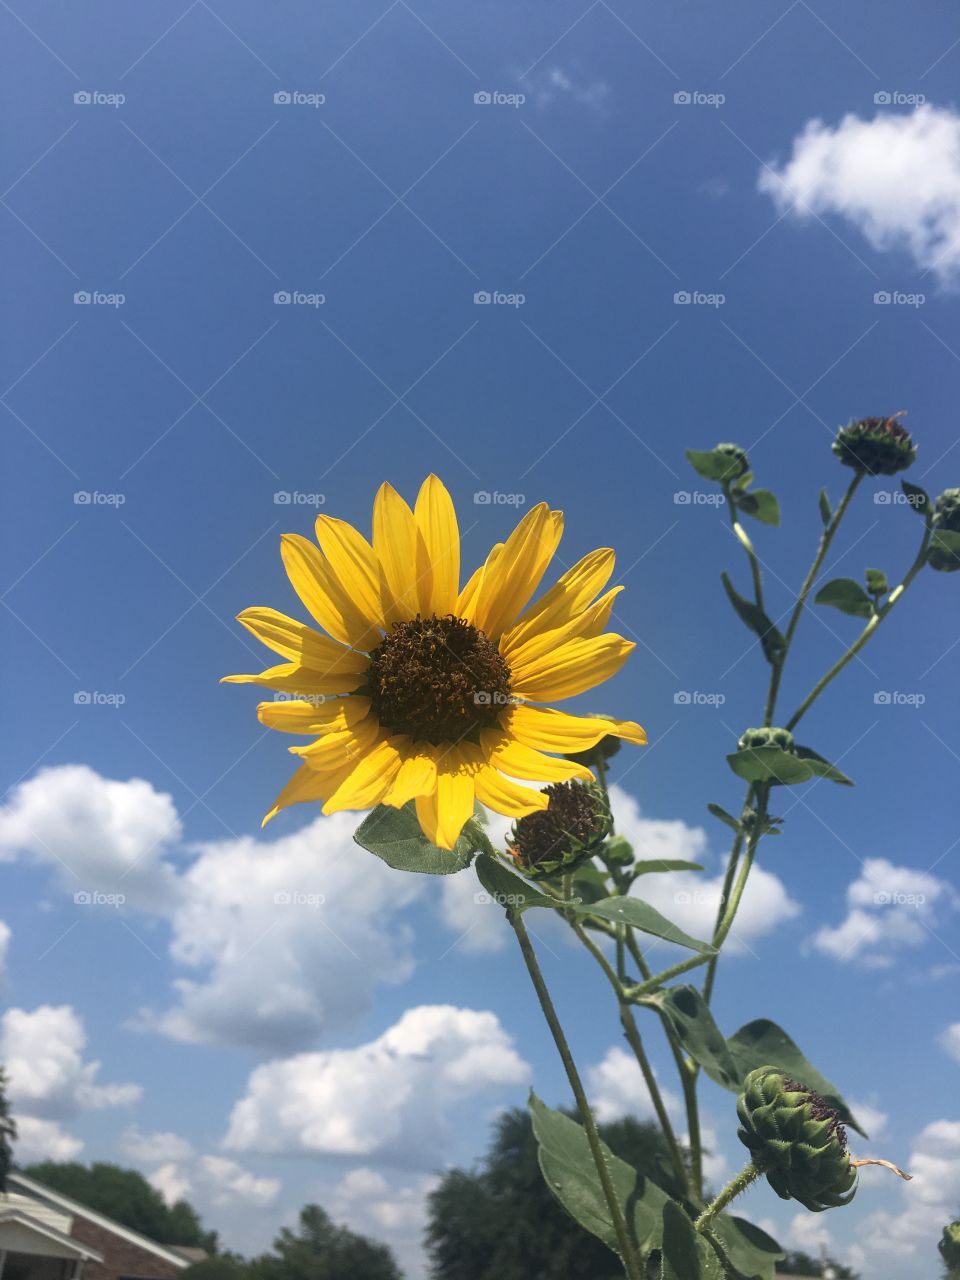 Sunflower in blue sky with white clouds 